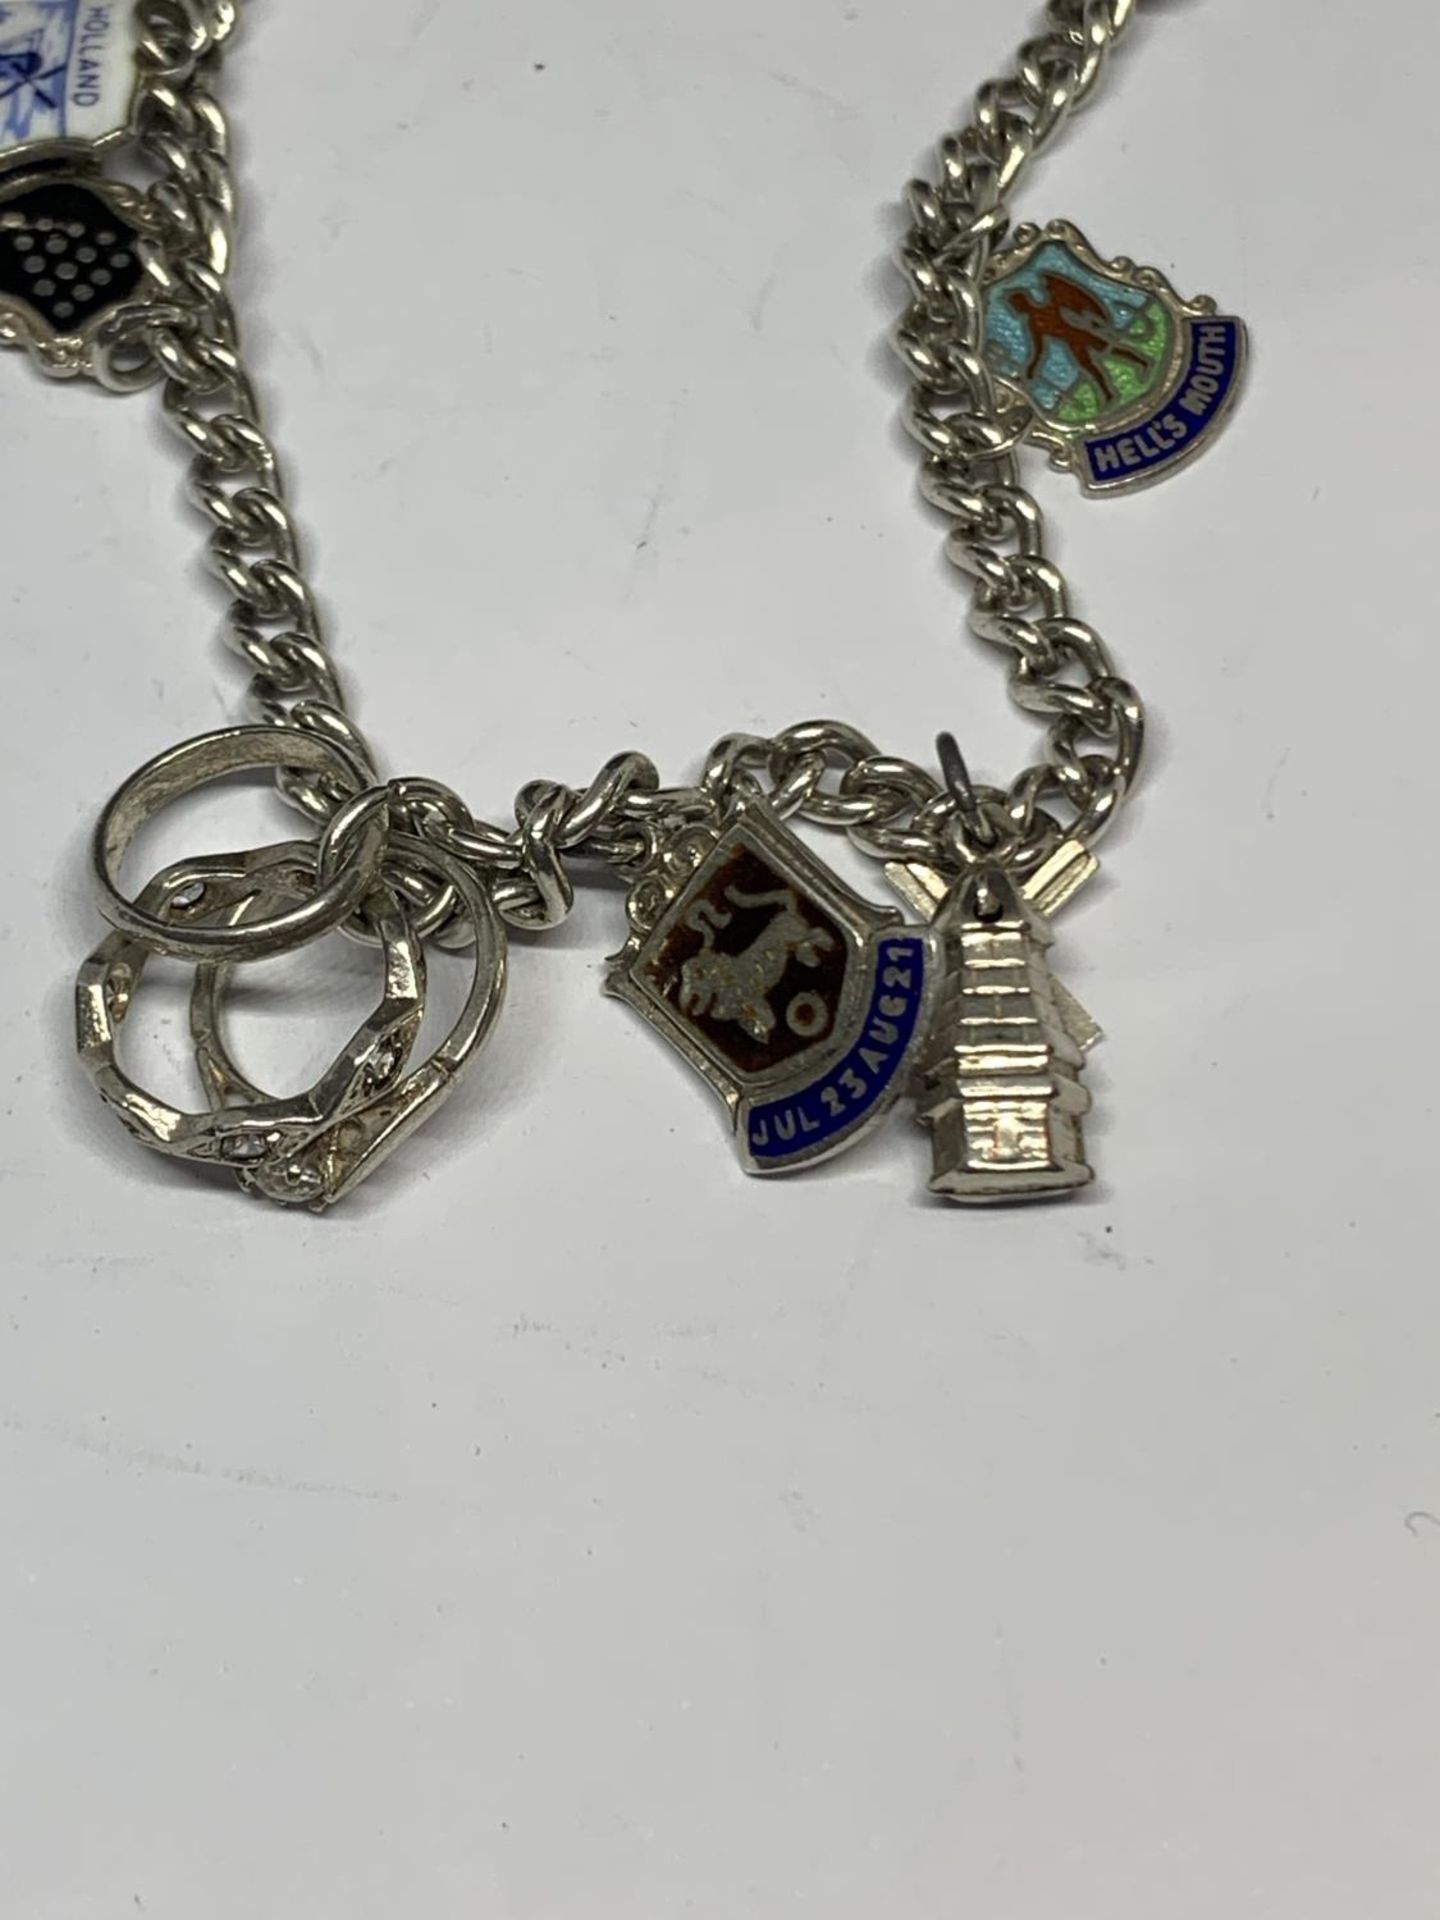 A SILVER CHARM BRACELET WITH SEVEN CHARMS - Image 3 of 3